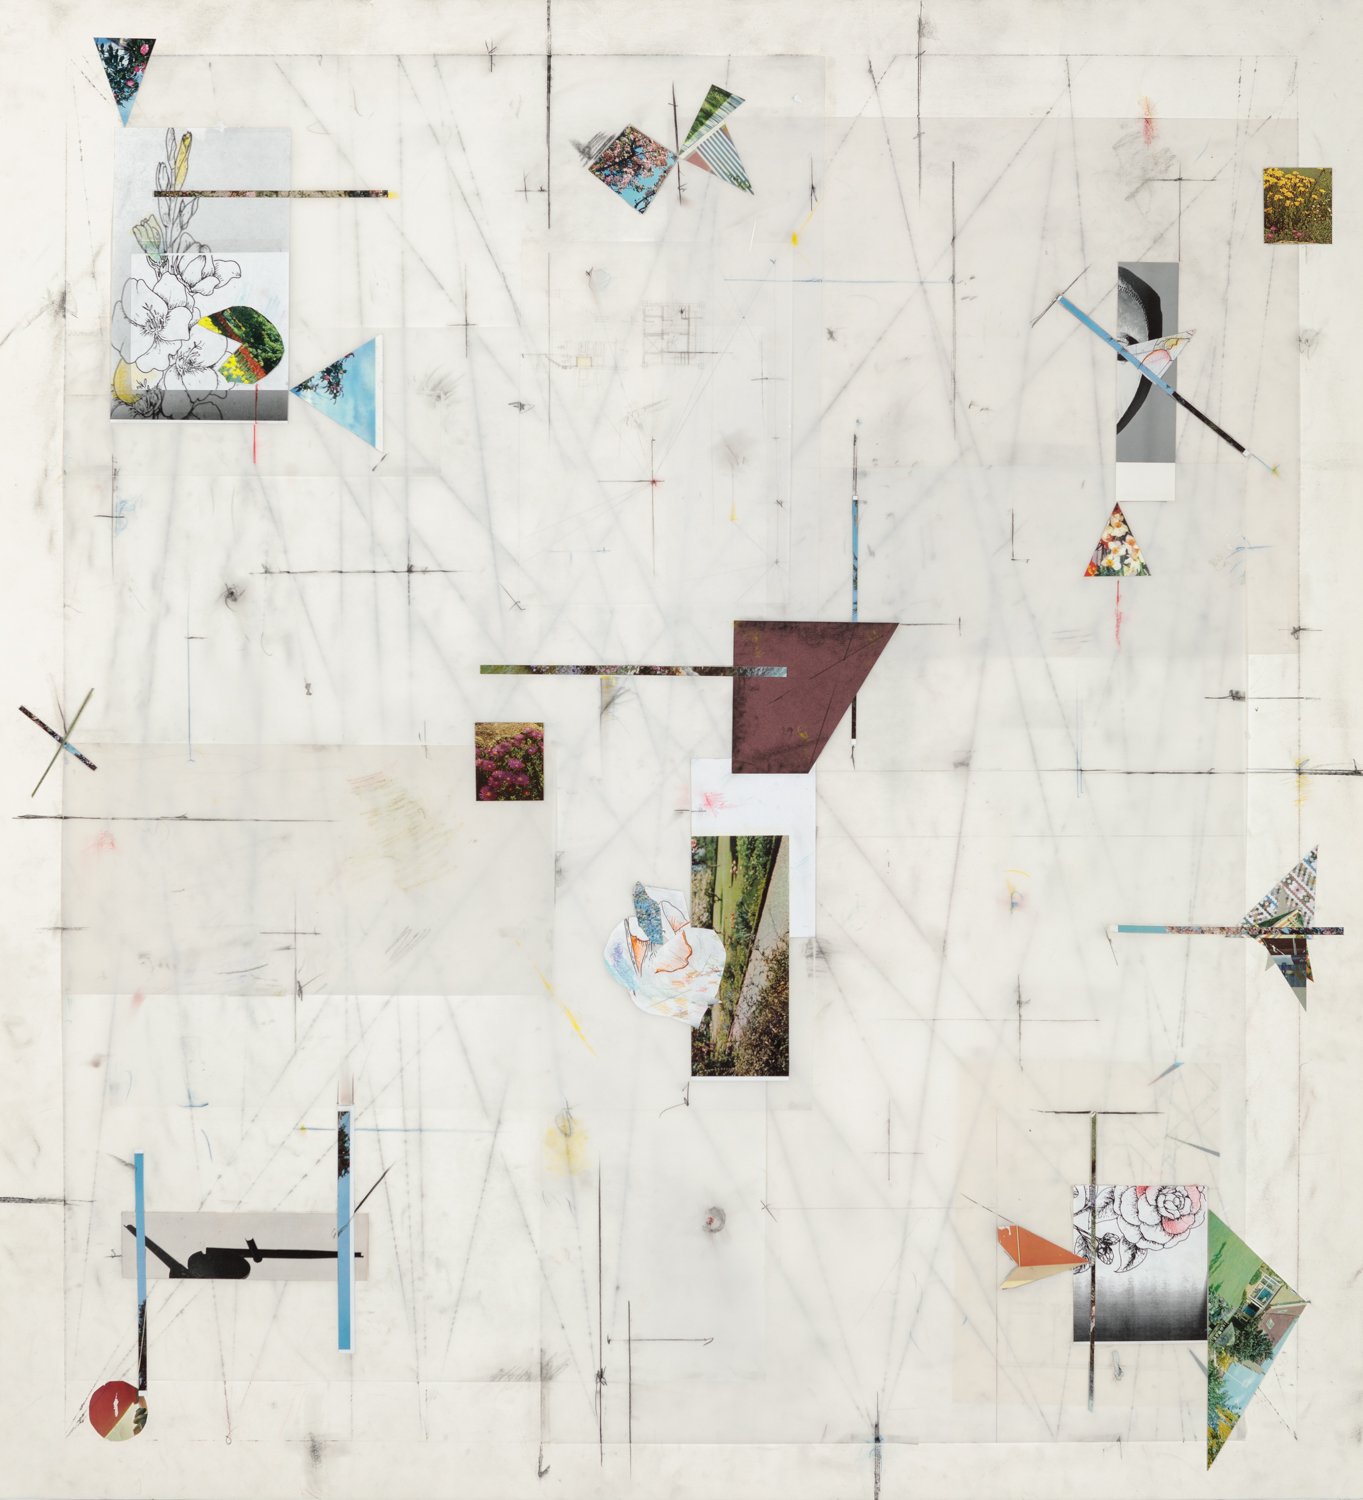  Untitled, 2021, graphite, colored pencil and collage on paper and mylar, 51 x 47 inches/ 130 x 120 cm 